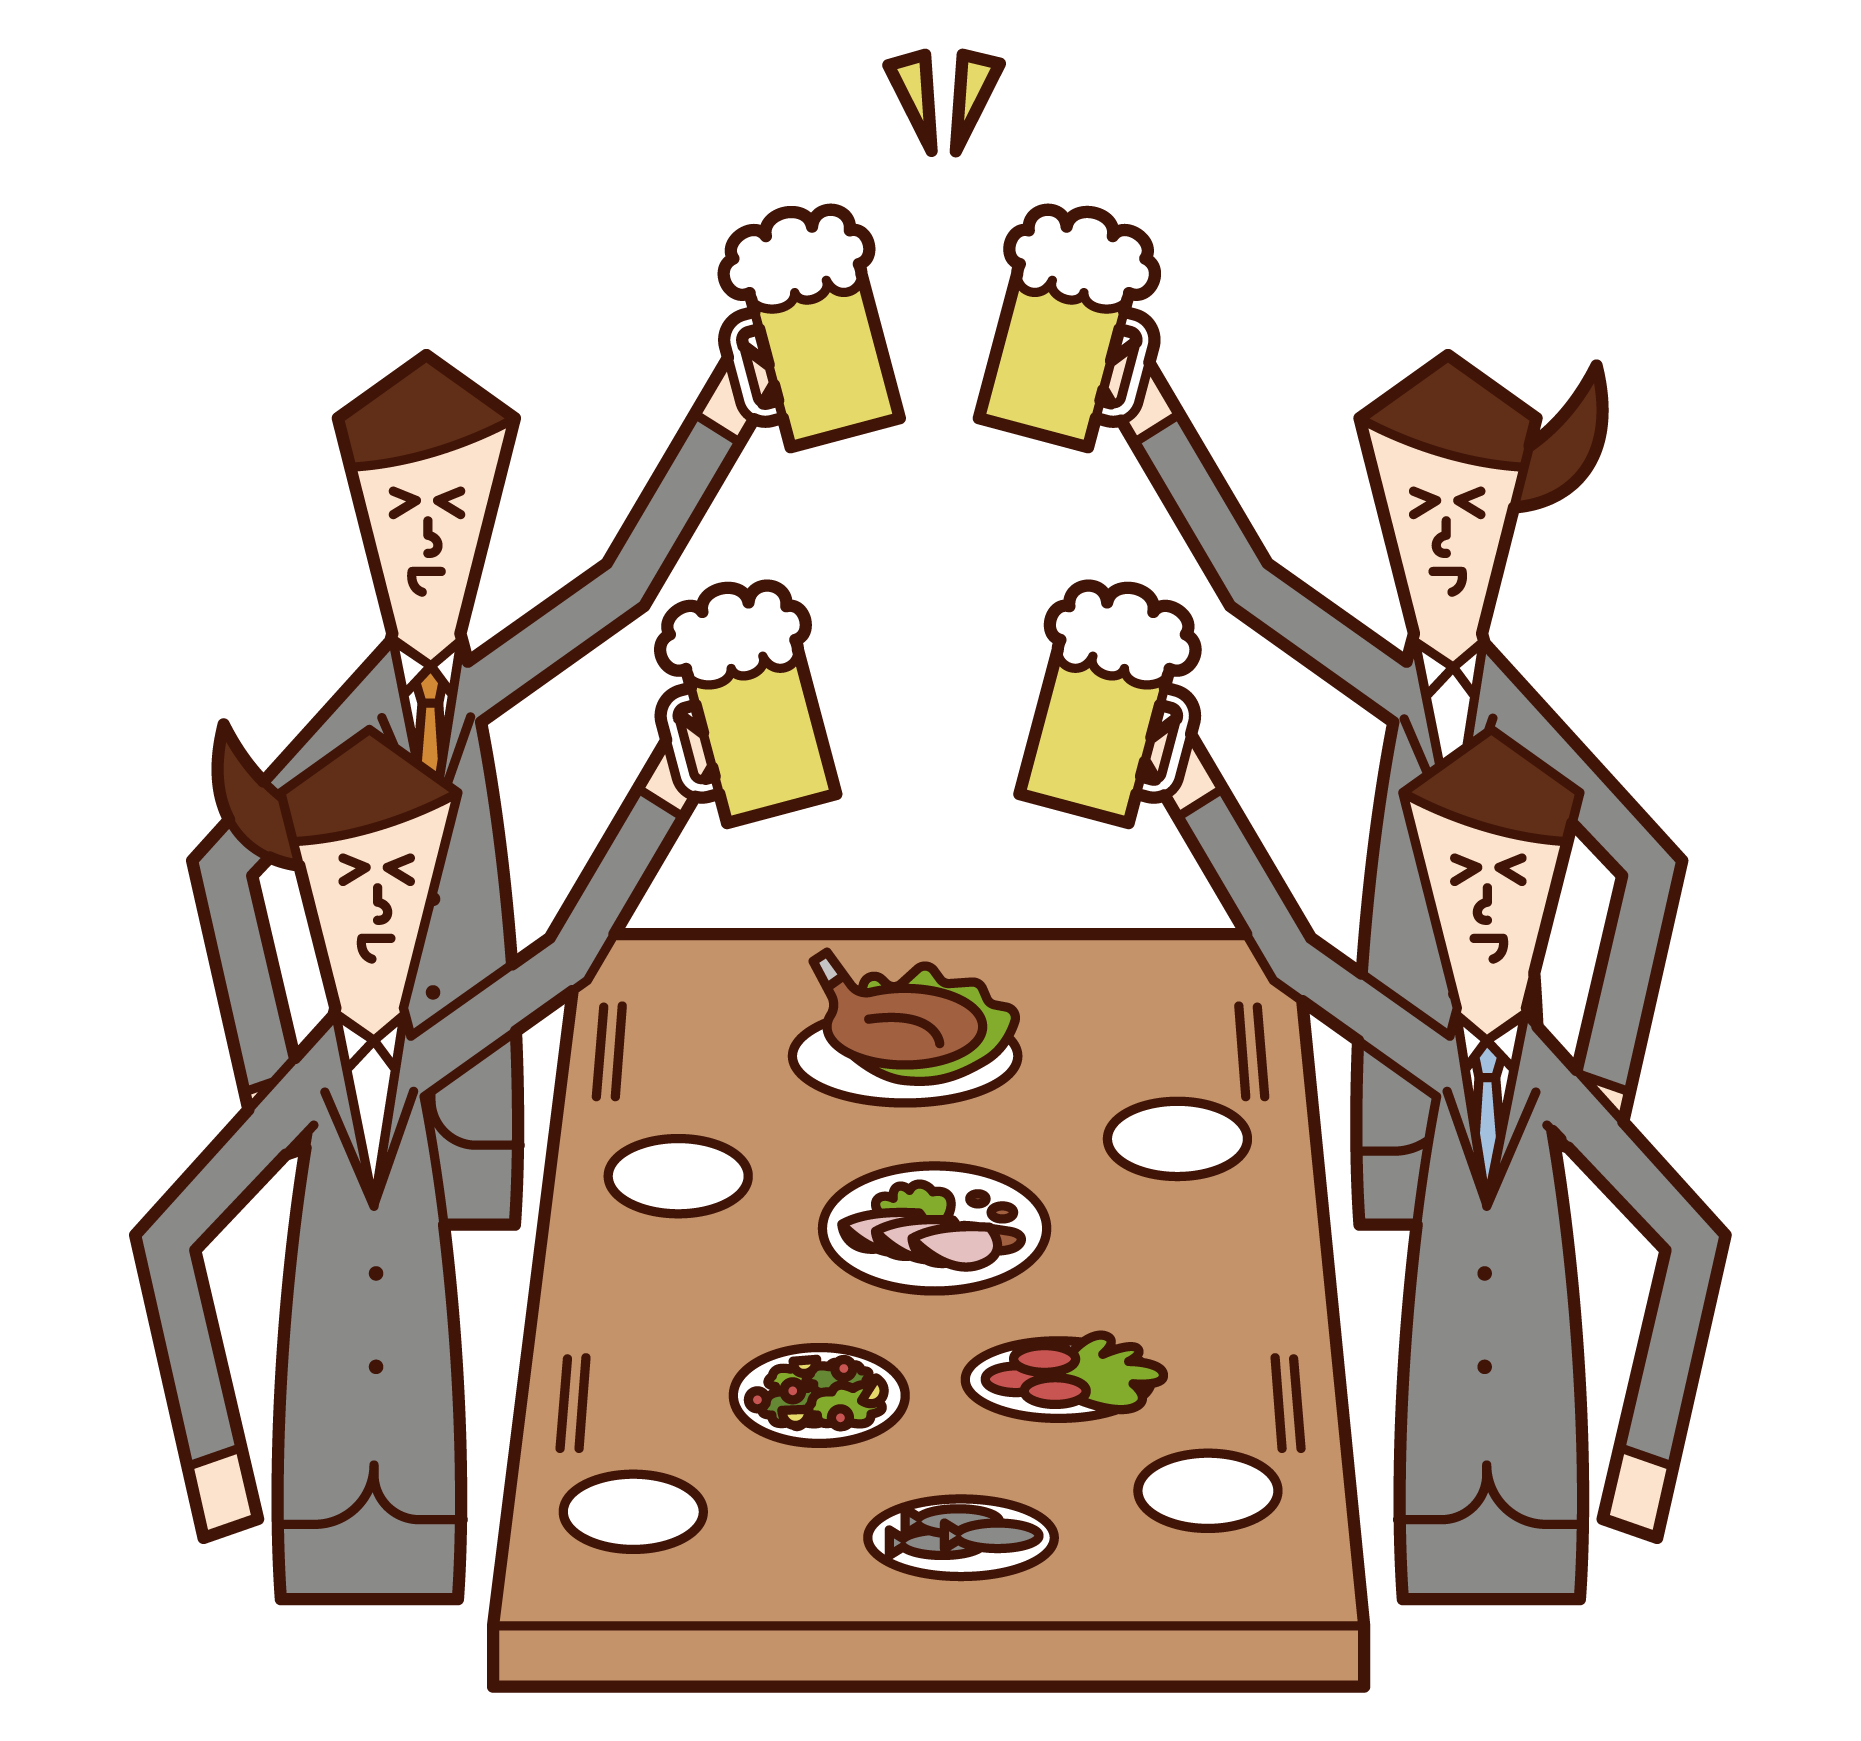 Illustrations of people toasting at a drinking party